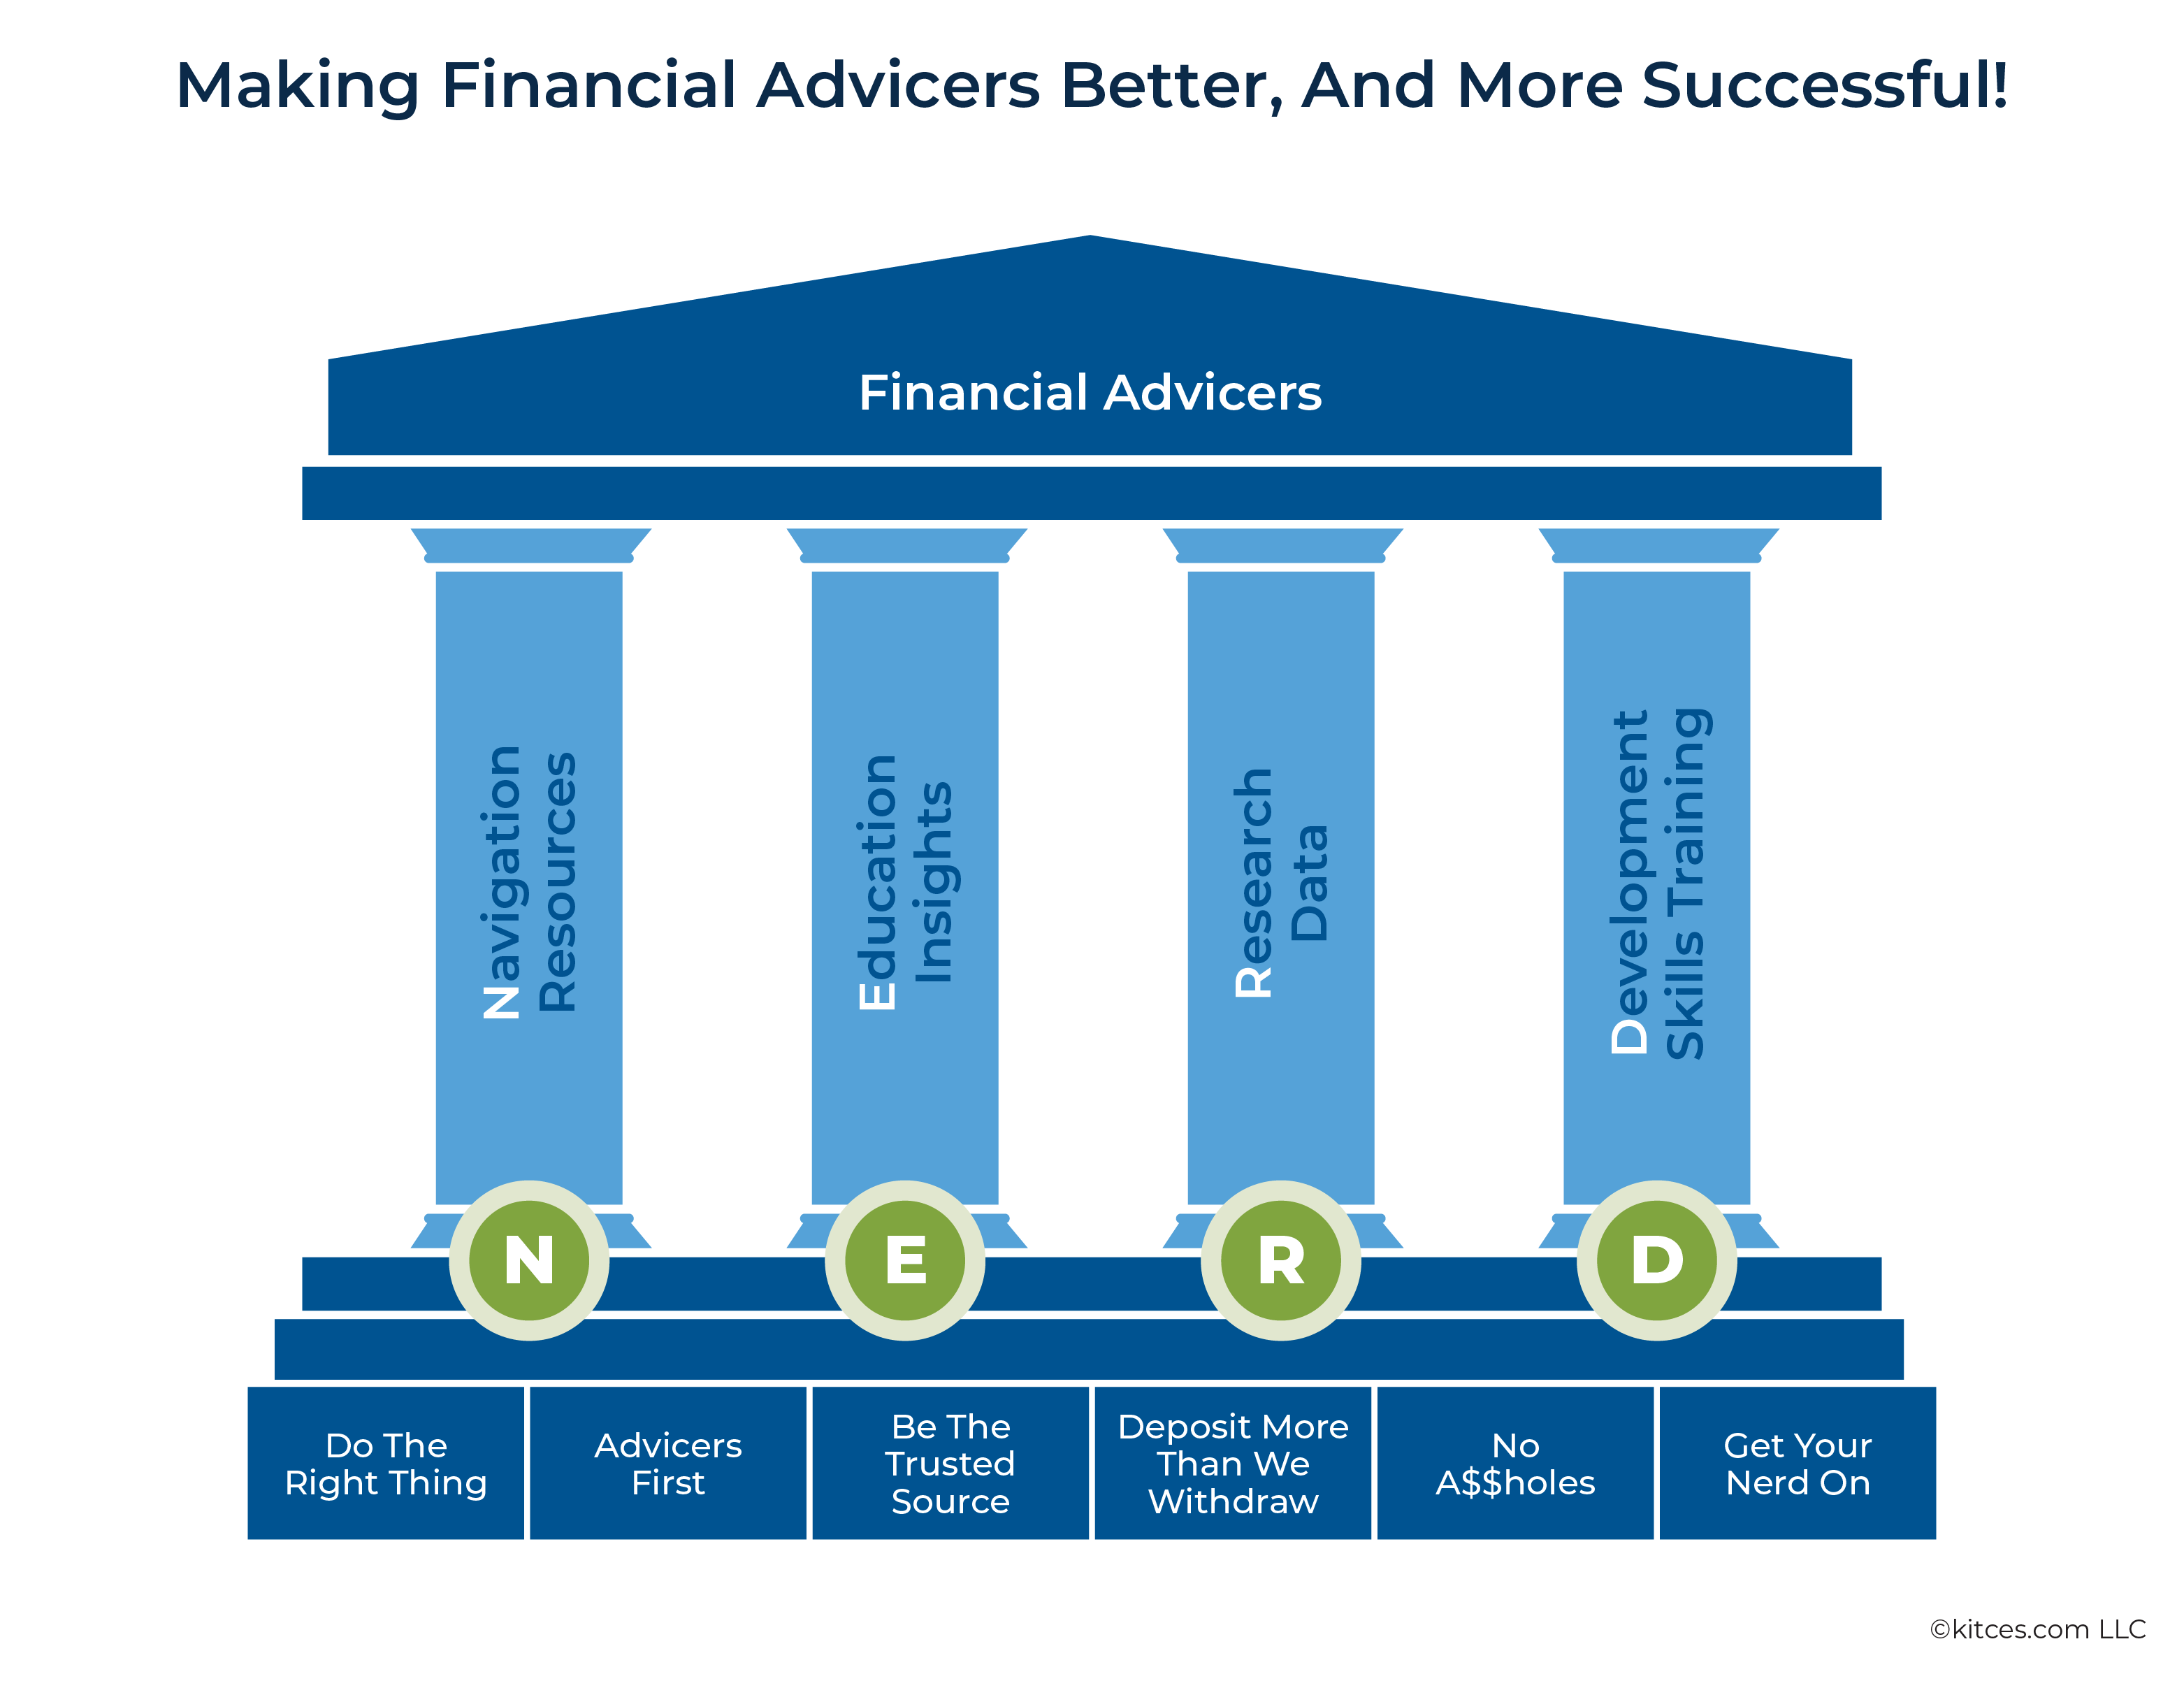 Making Financial Advicers Better And More Successful